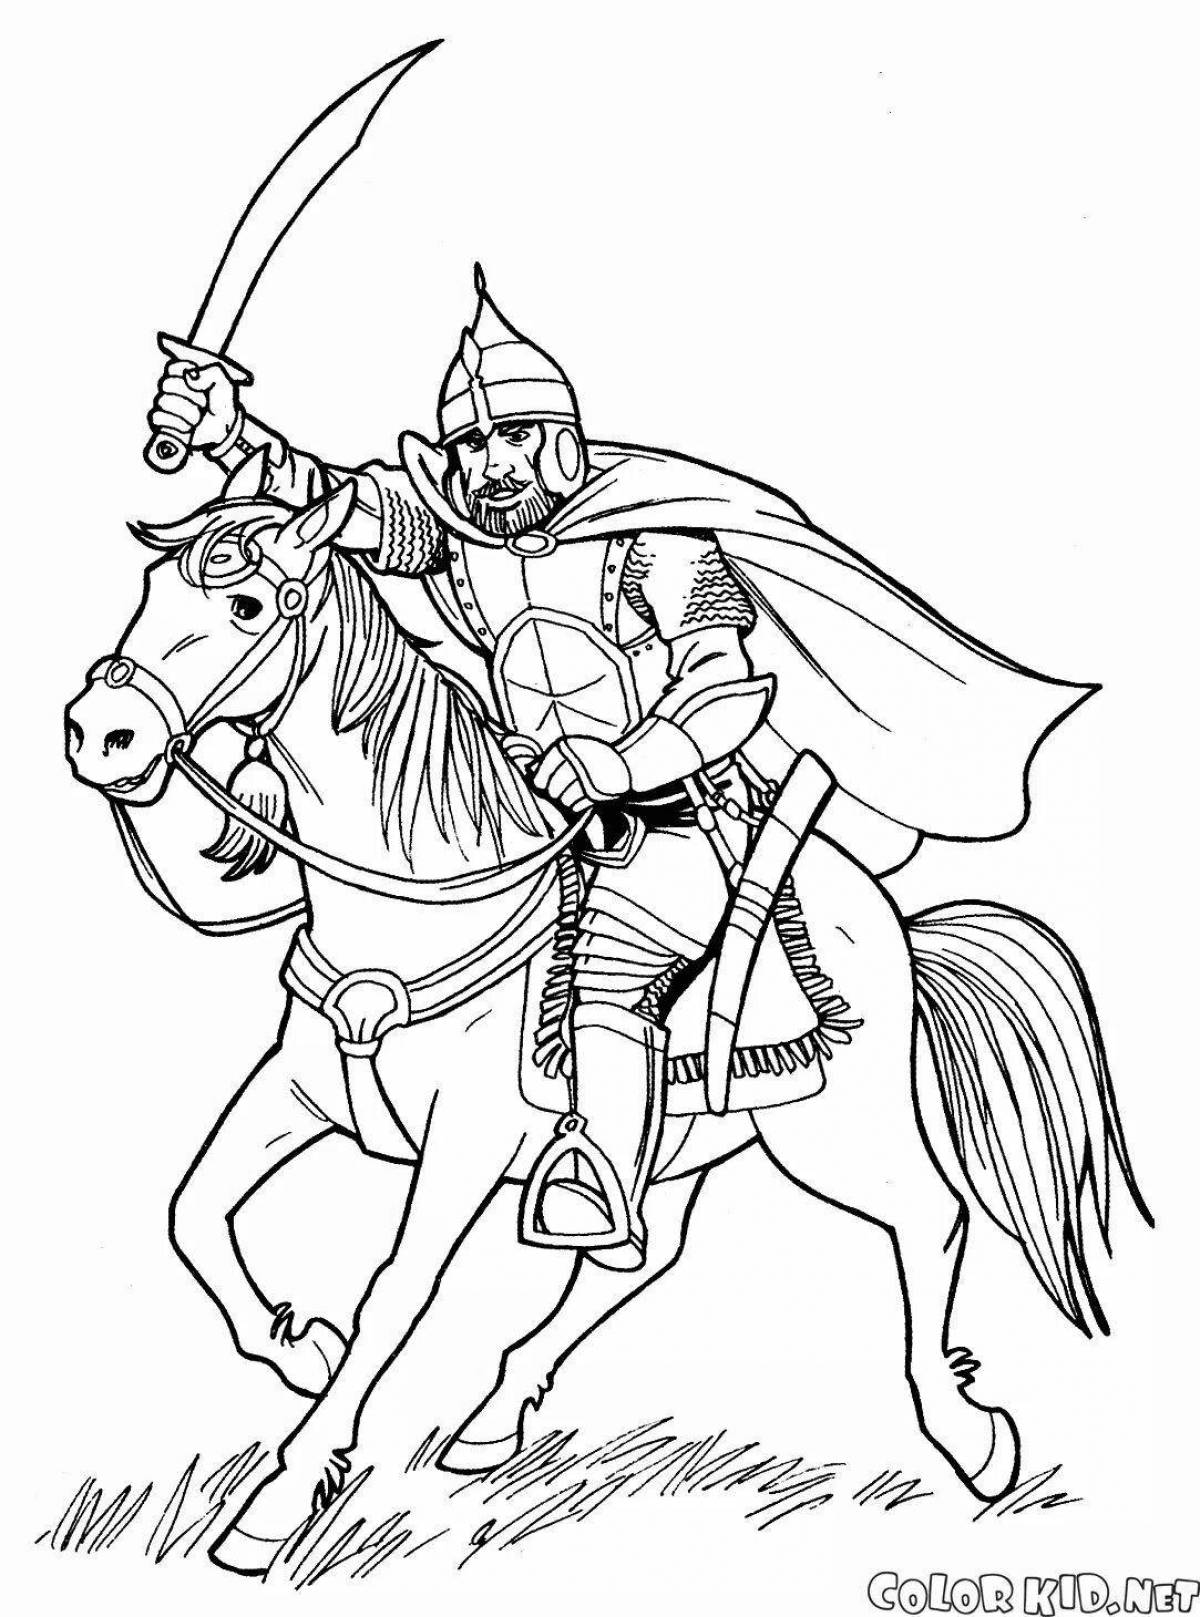 Coloring page brave mongolian warrior